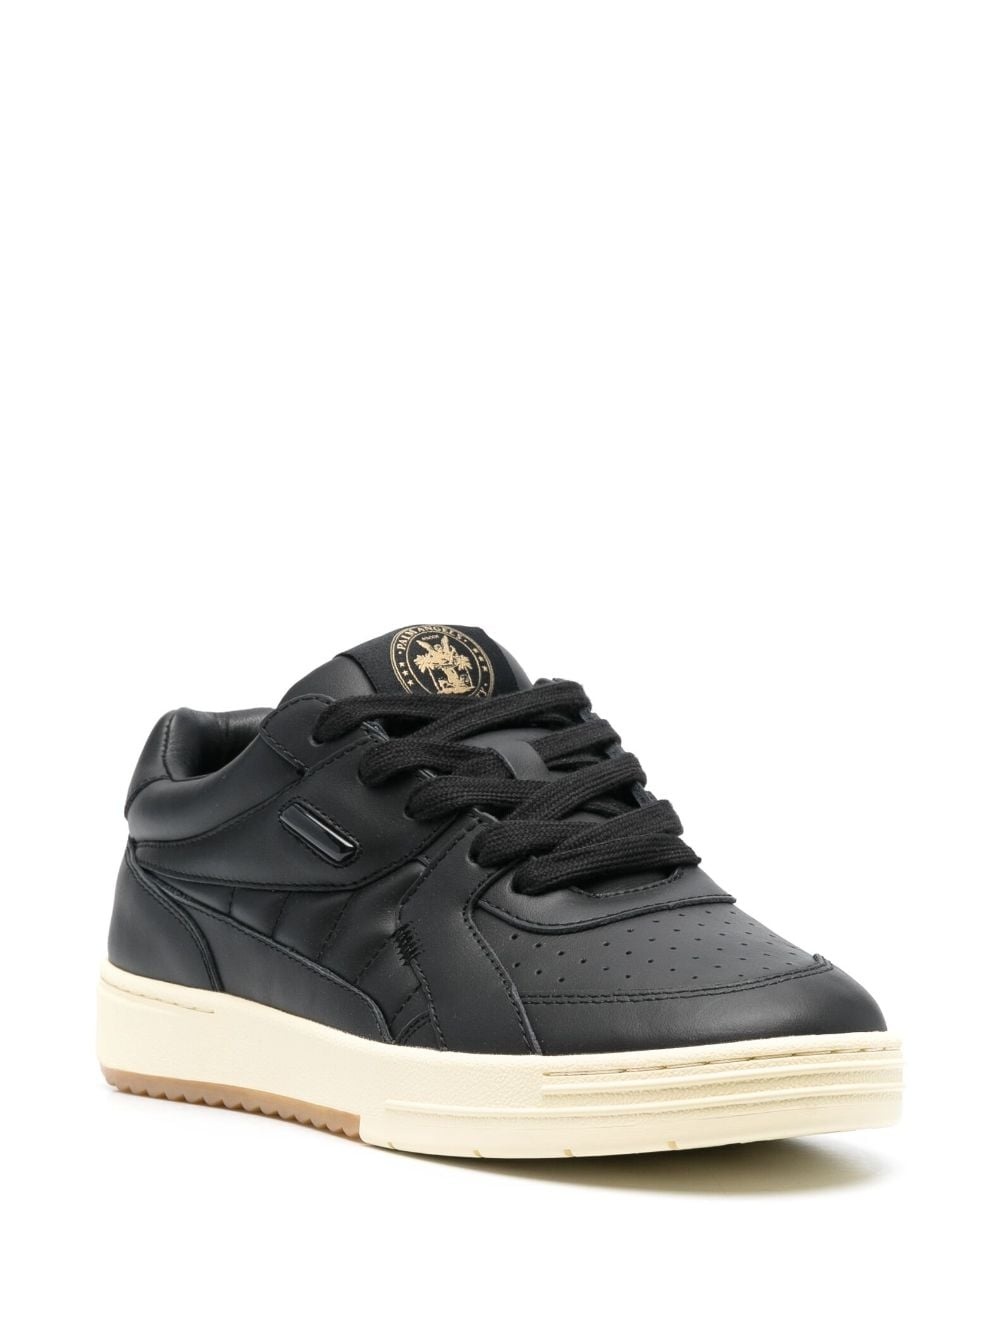 University quilted leather sneakers - 2